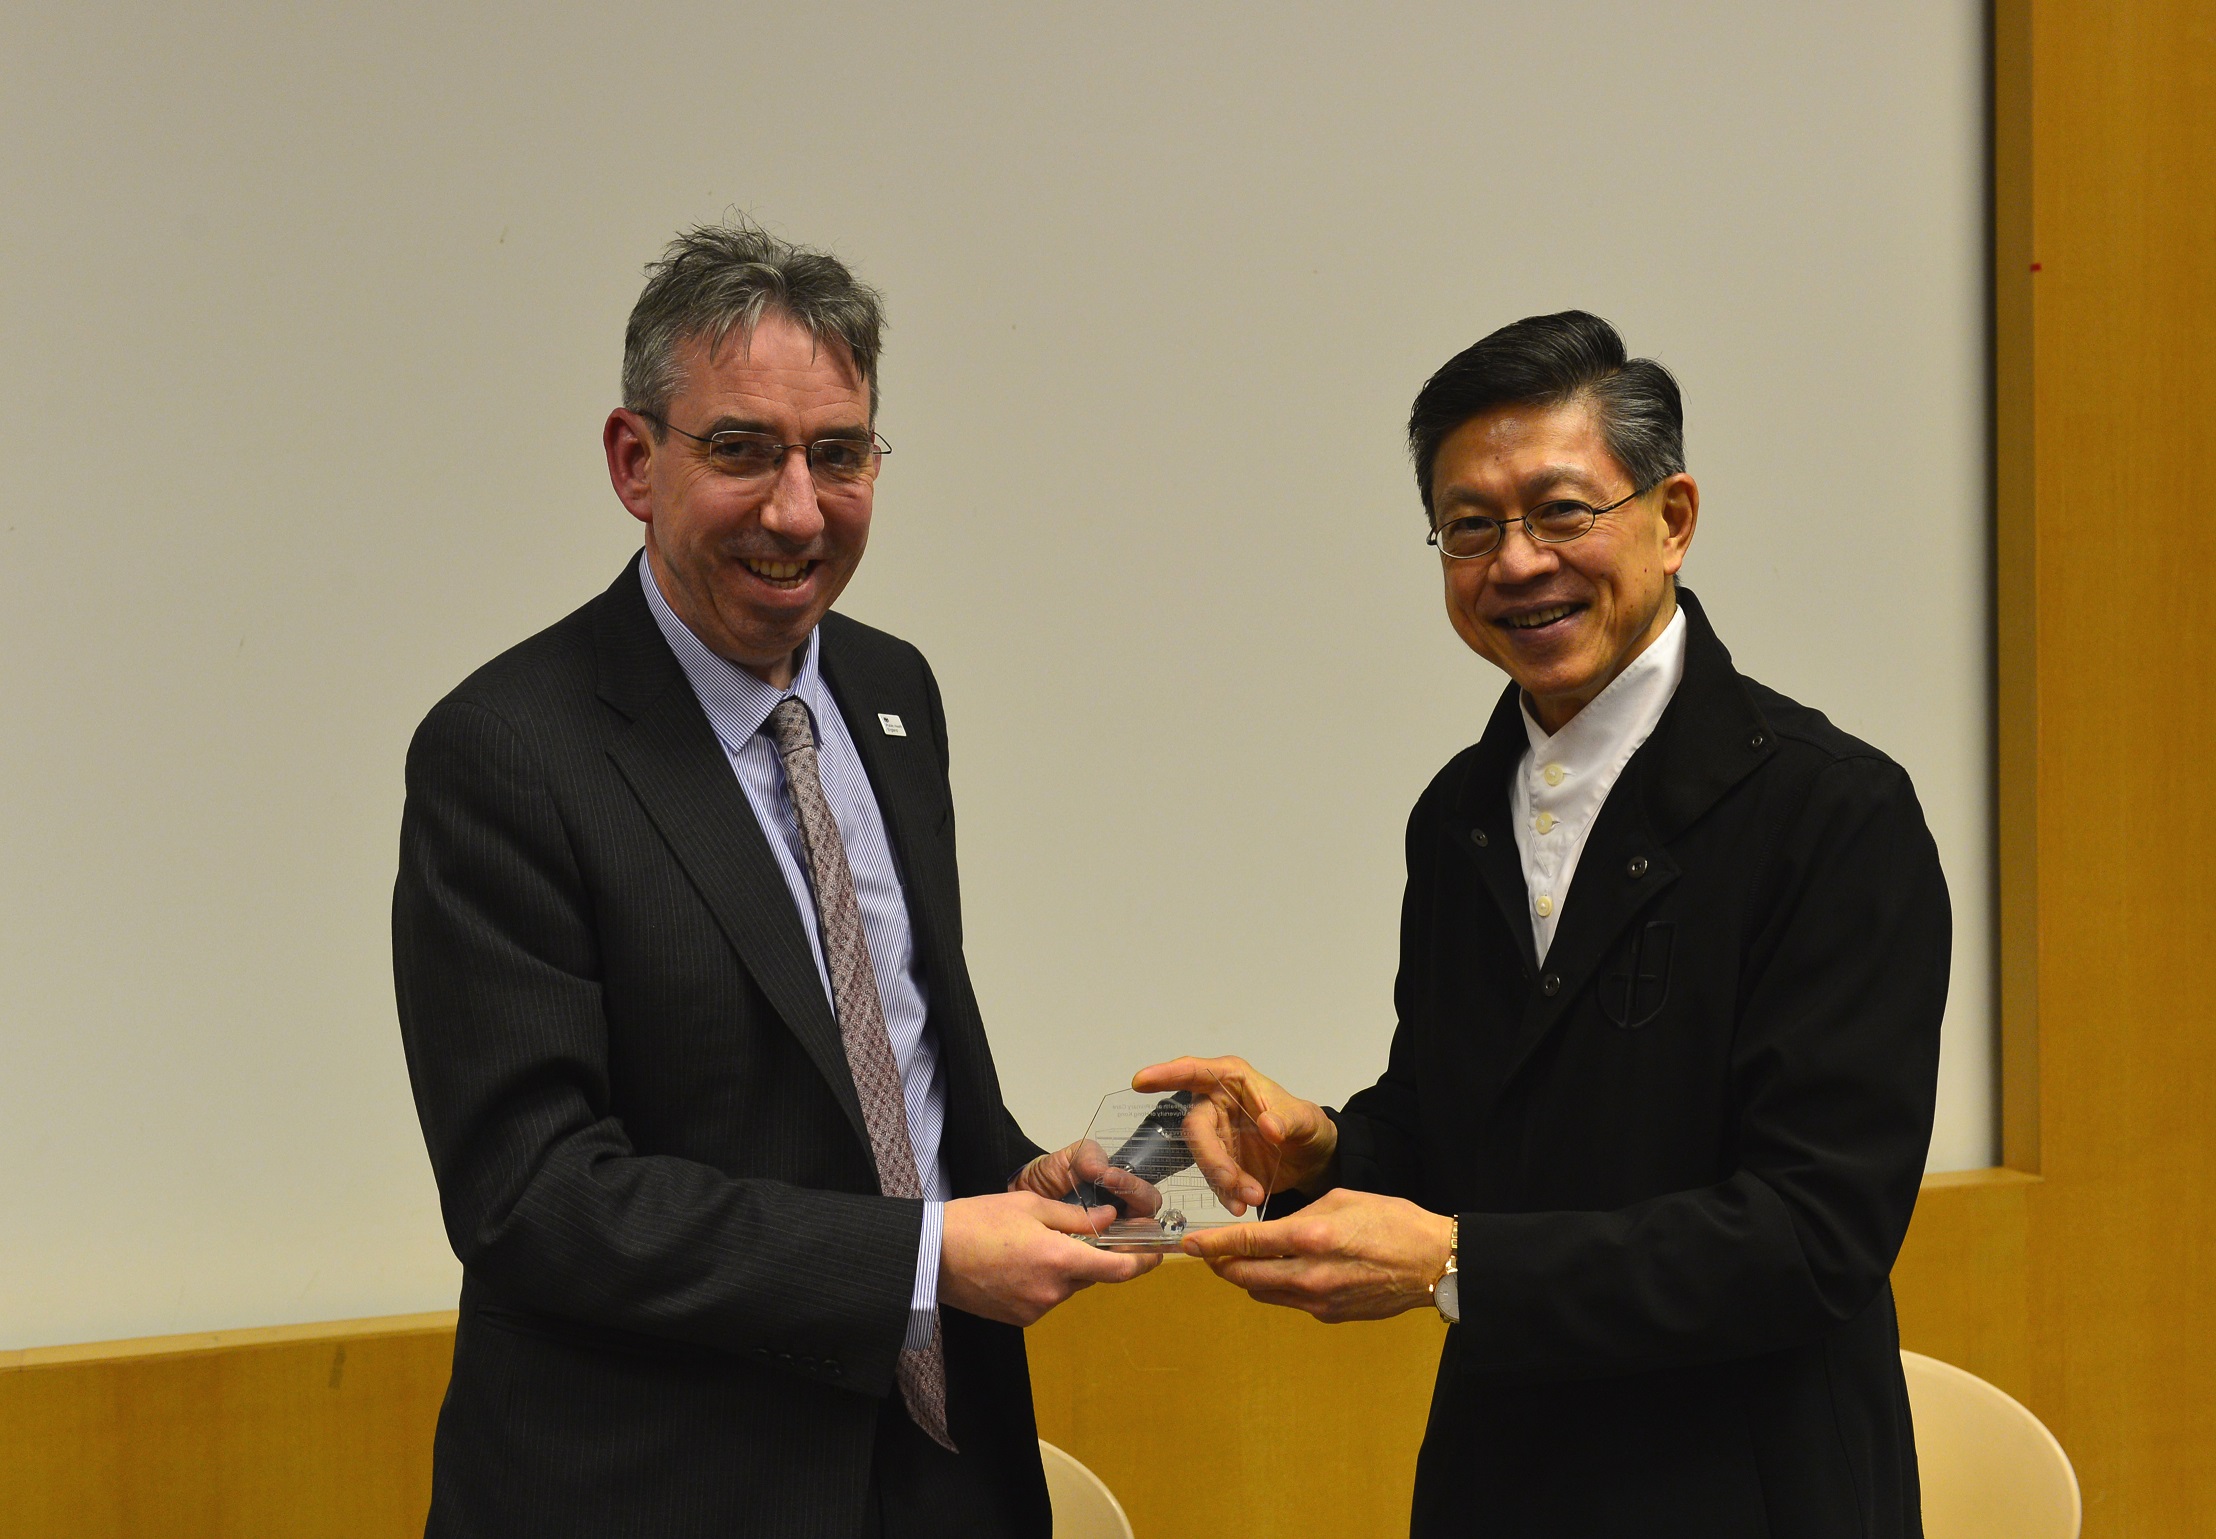 Prof. Eng-Kiong Yeoh (right), Director of the Jockey Club School of Public Health and Primary Care